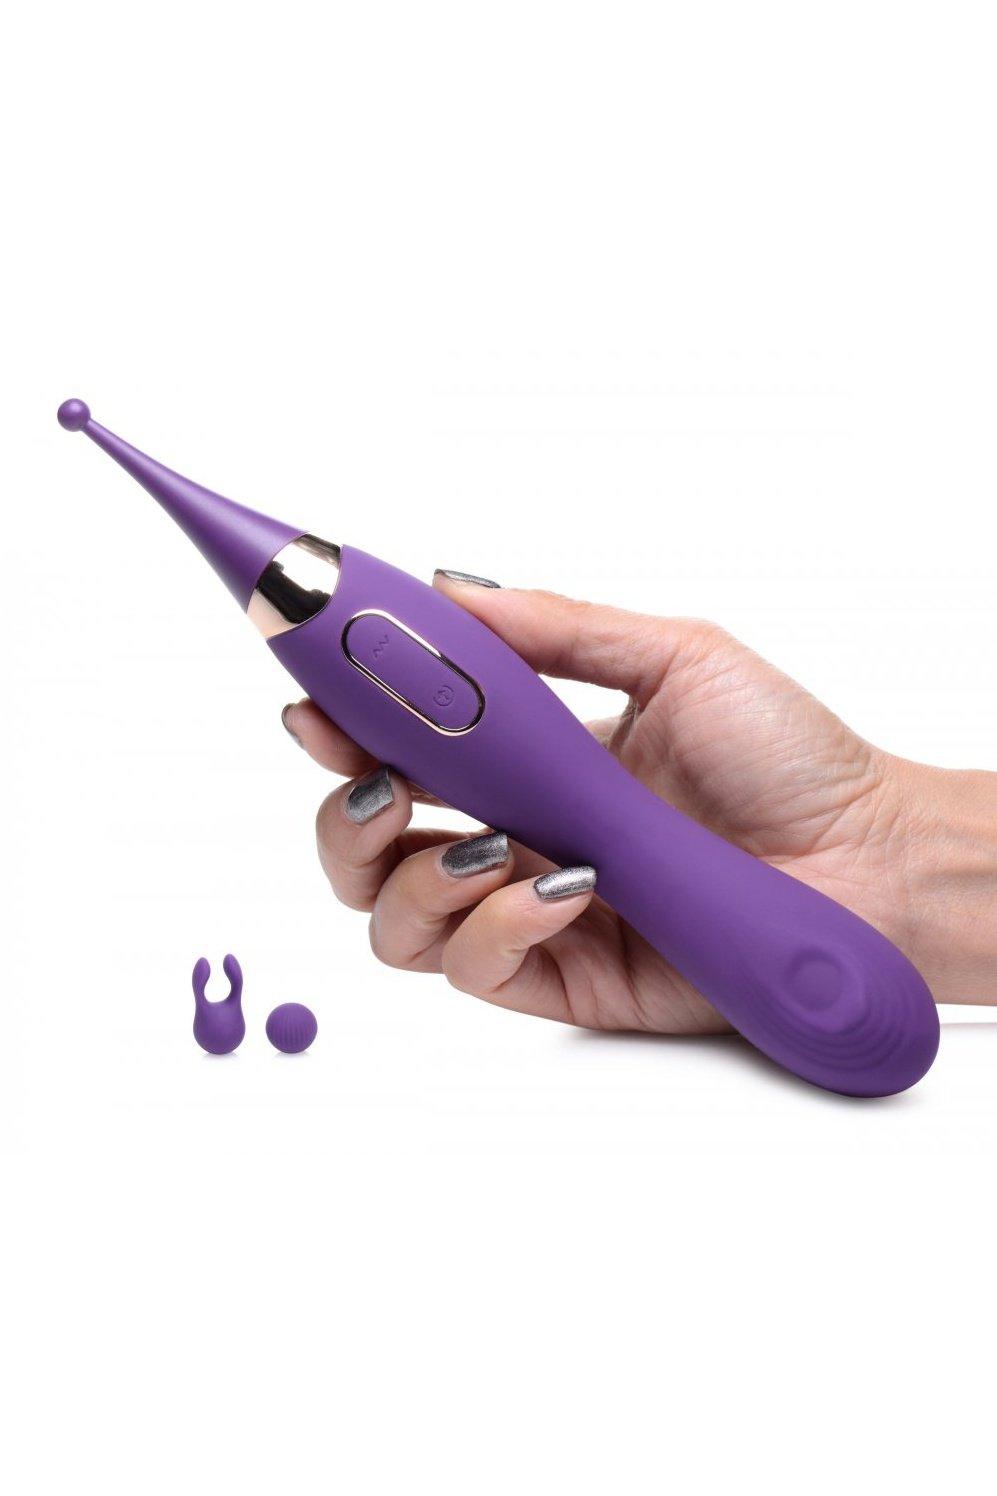 Pulsing G-spot Pinpoint Silicone Vibrator with Attachments - Sex On the Go